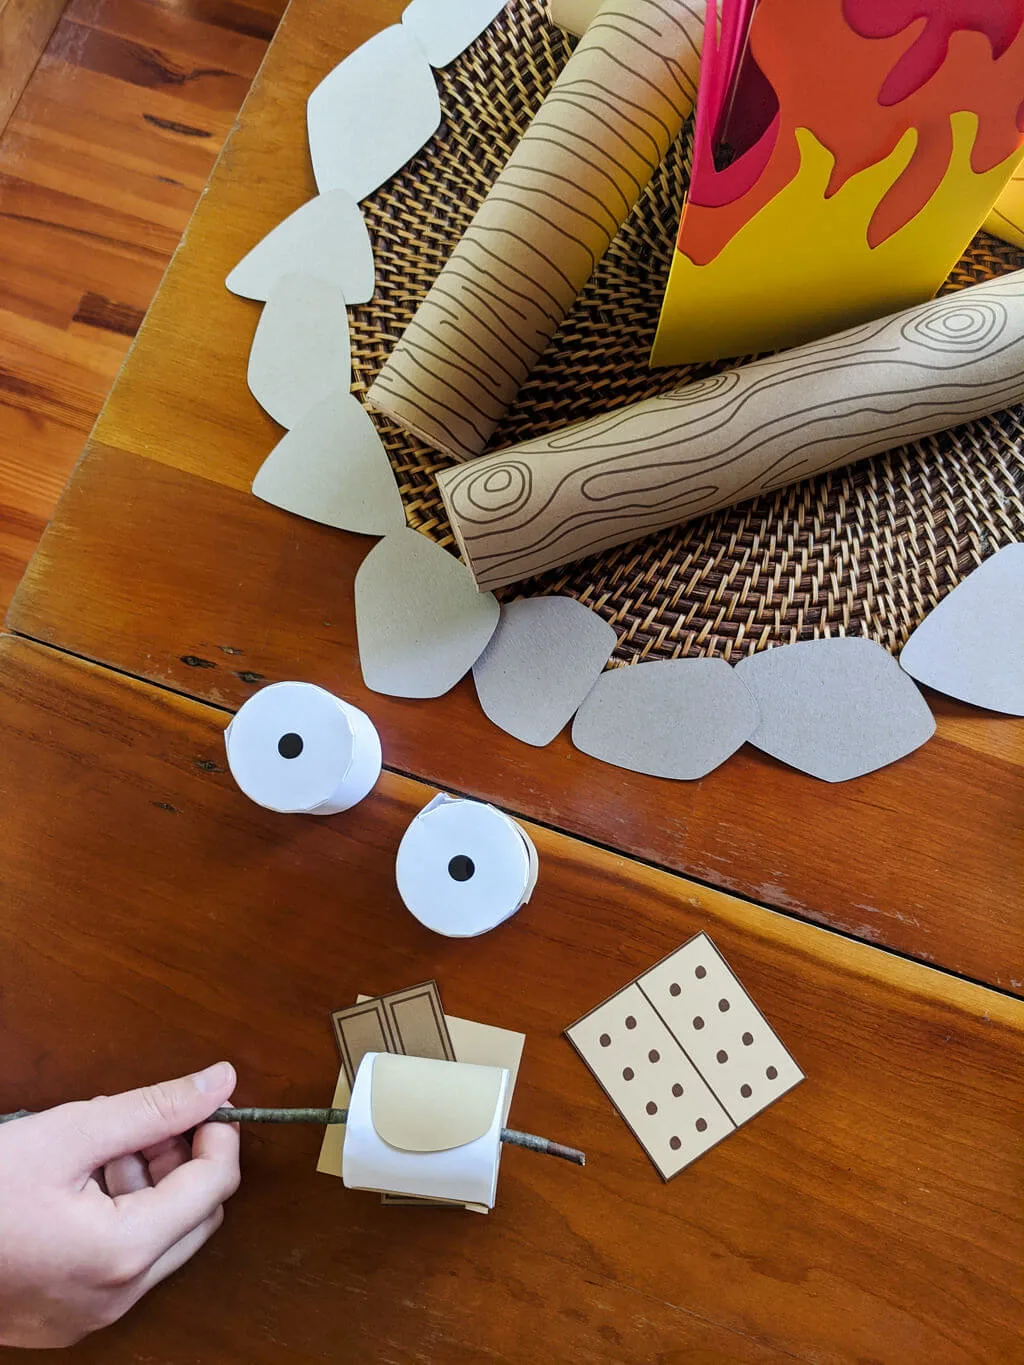 S’mores craft for pretend play with paper campfire